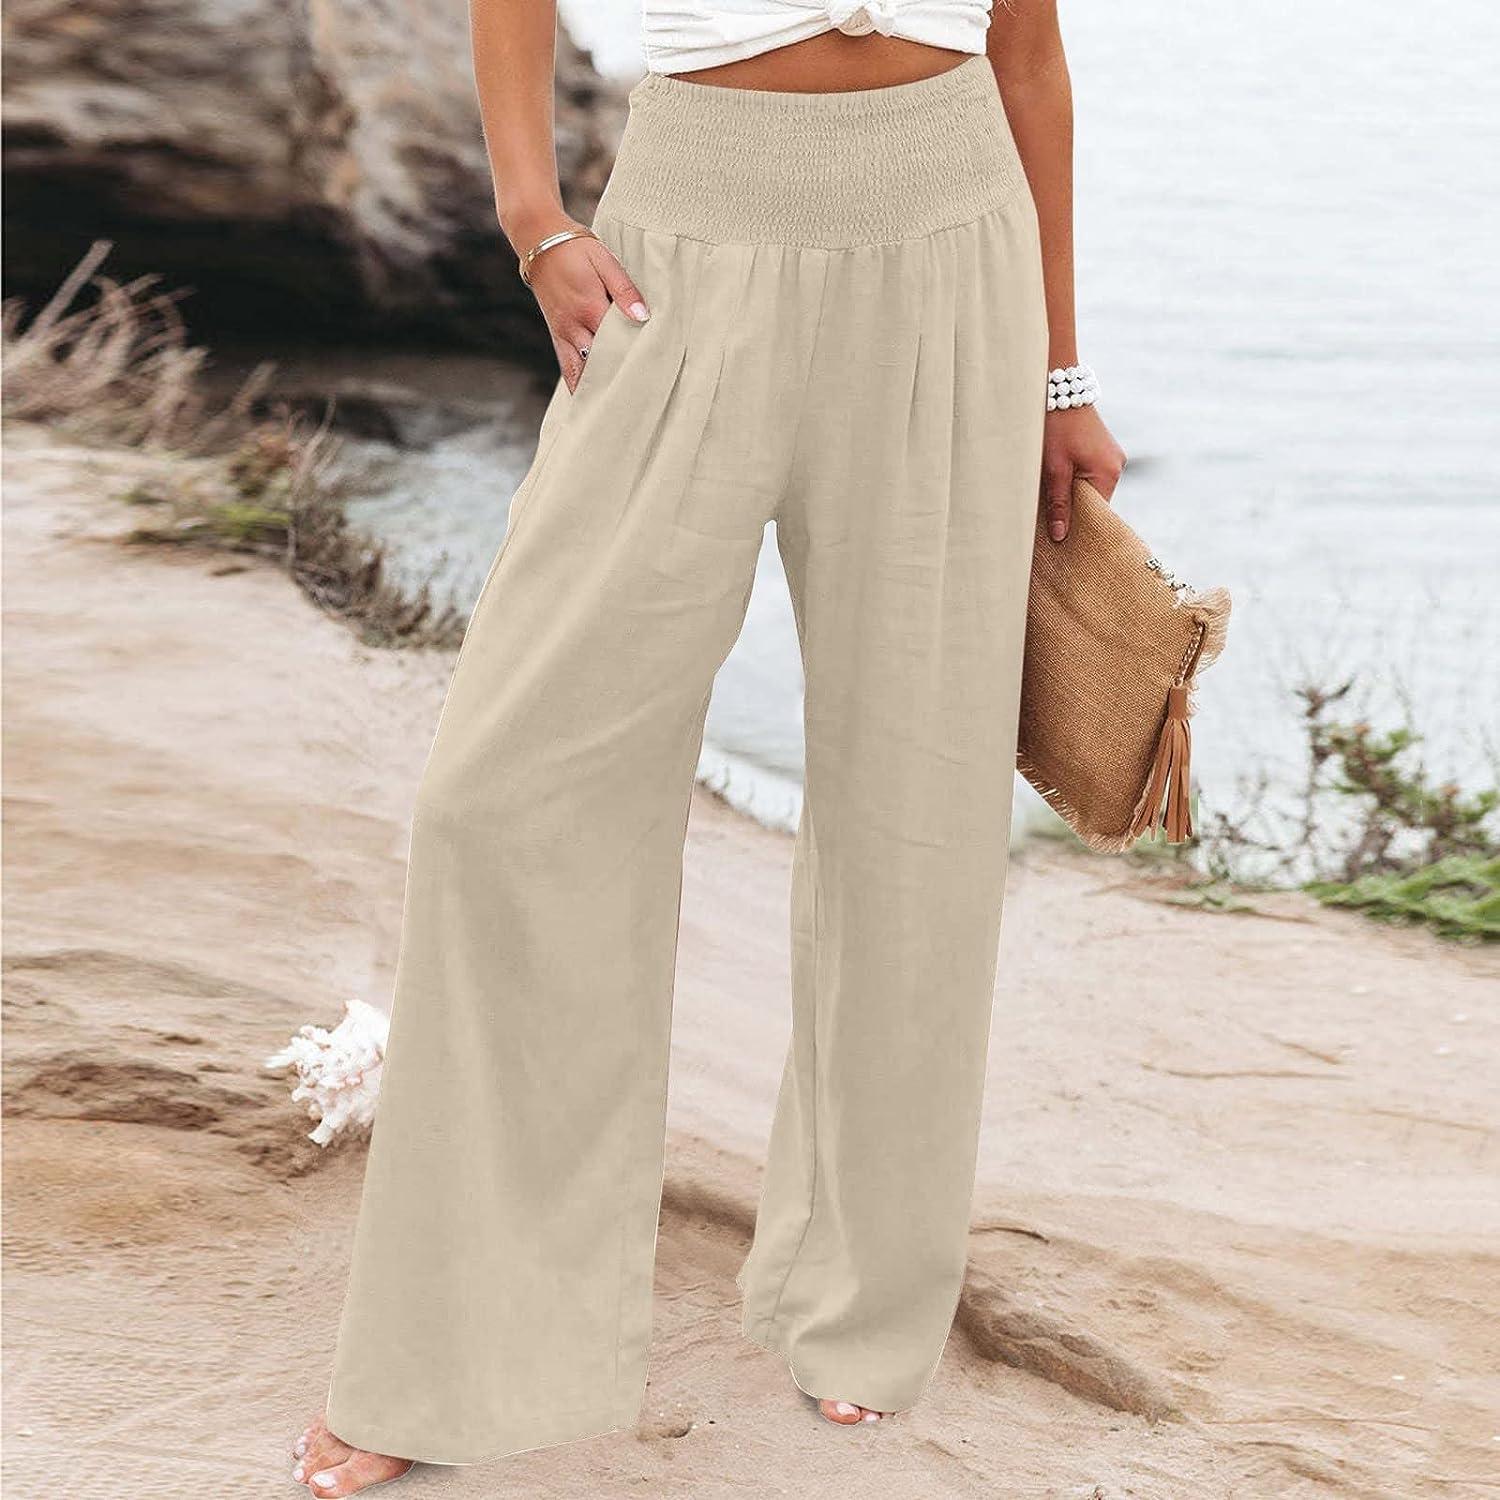  DGZTWLL Khaki Pants for Women Linen Pants Women Summer Petite Plus  Size High Waisted Tapered Pants Casual Joggers Yoga Sweatpants Trousers  Pockets(1-AG,Small) : Clothing, Shoes & Jewelry